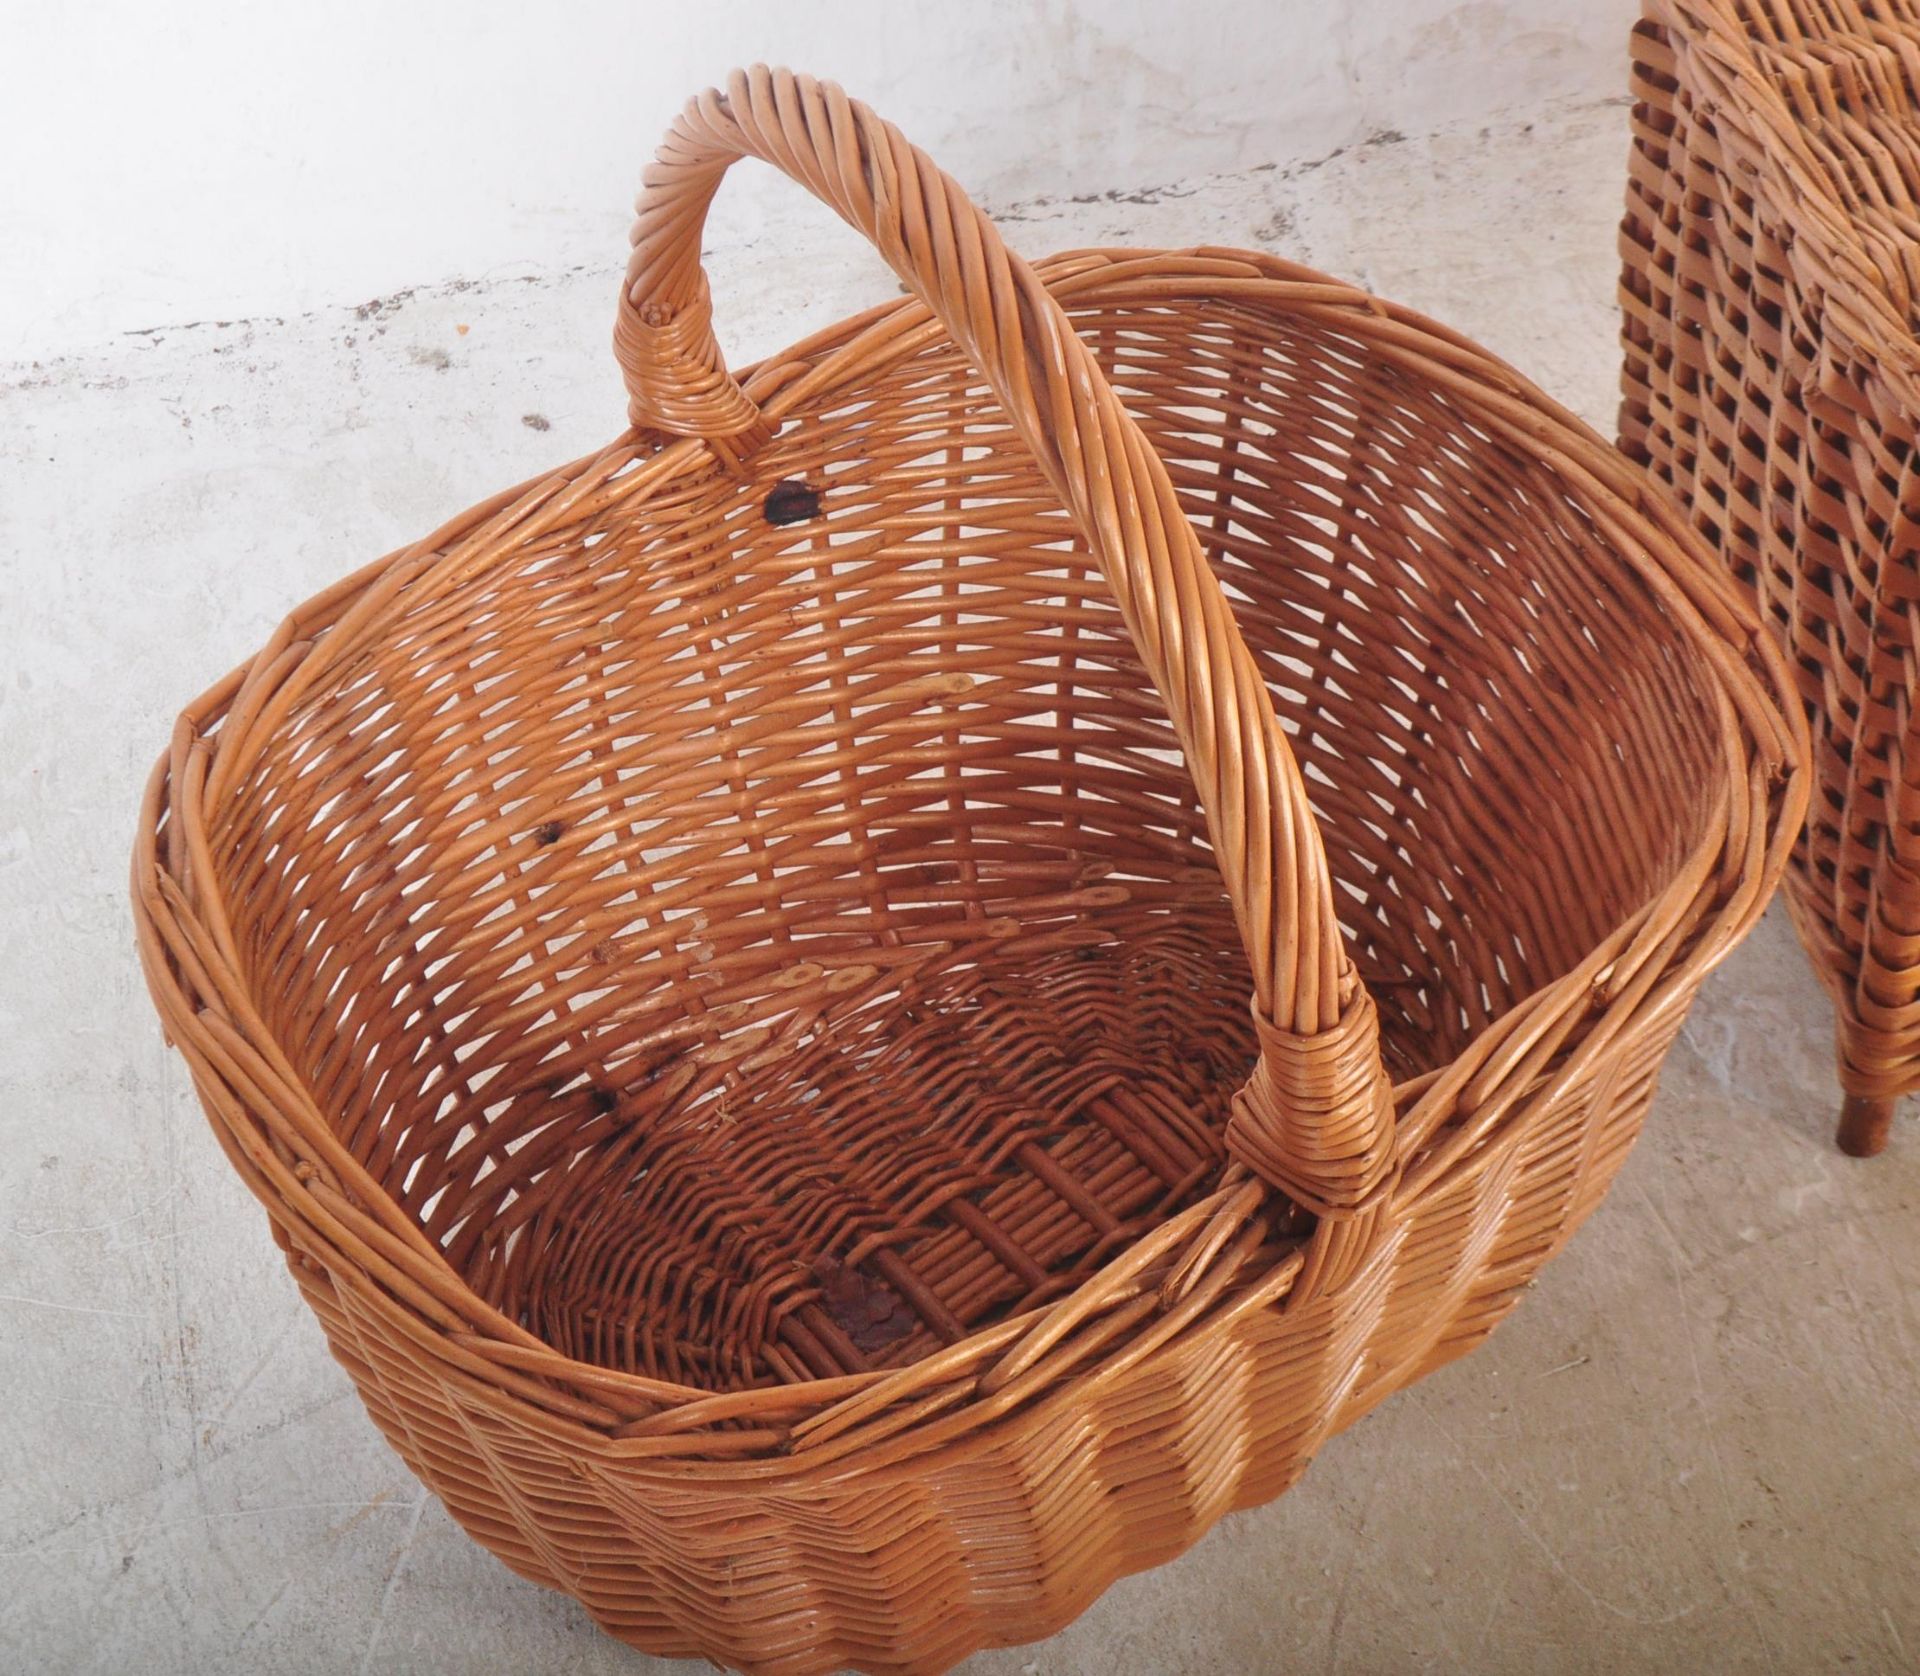 SET OF FOUR VINTAGE WICKER RATTAN PICNIC BASKETS - Image 3 of 5